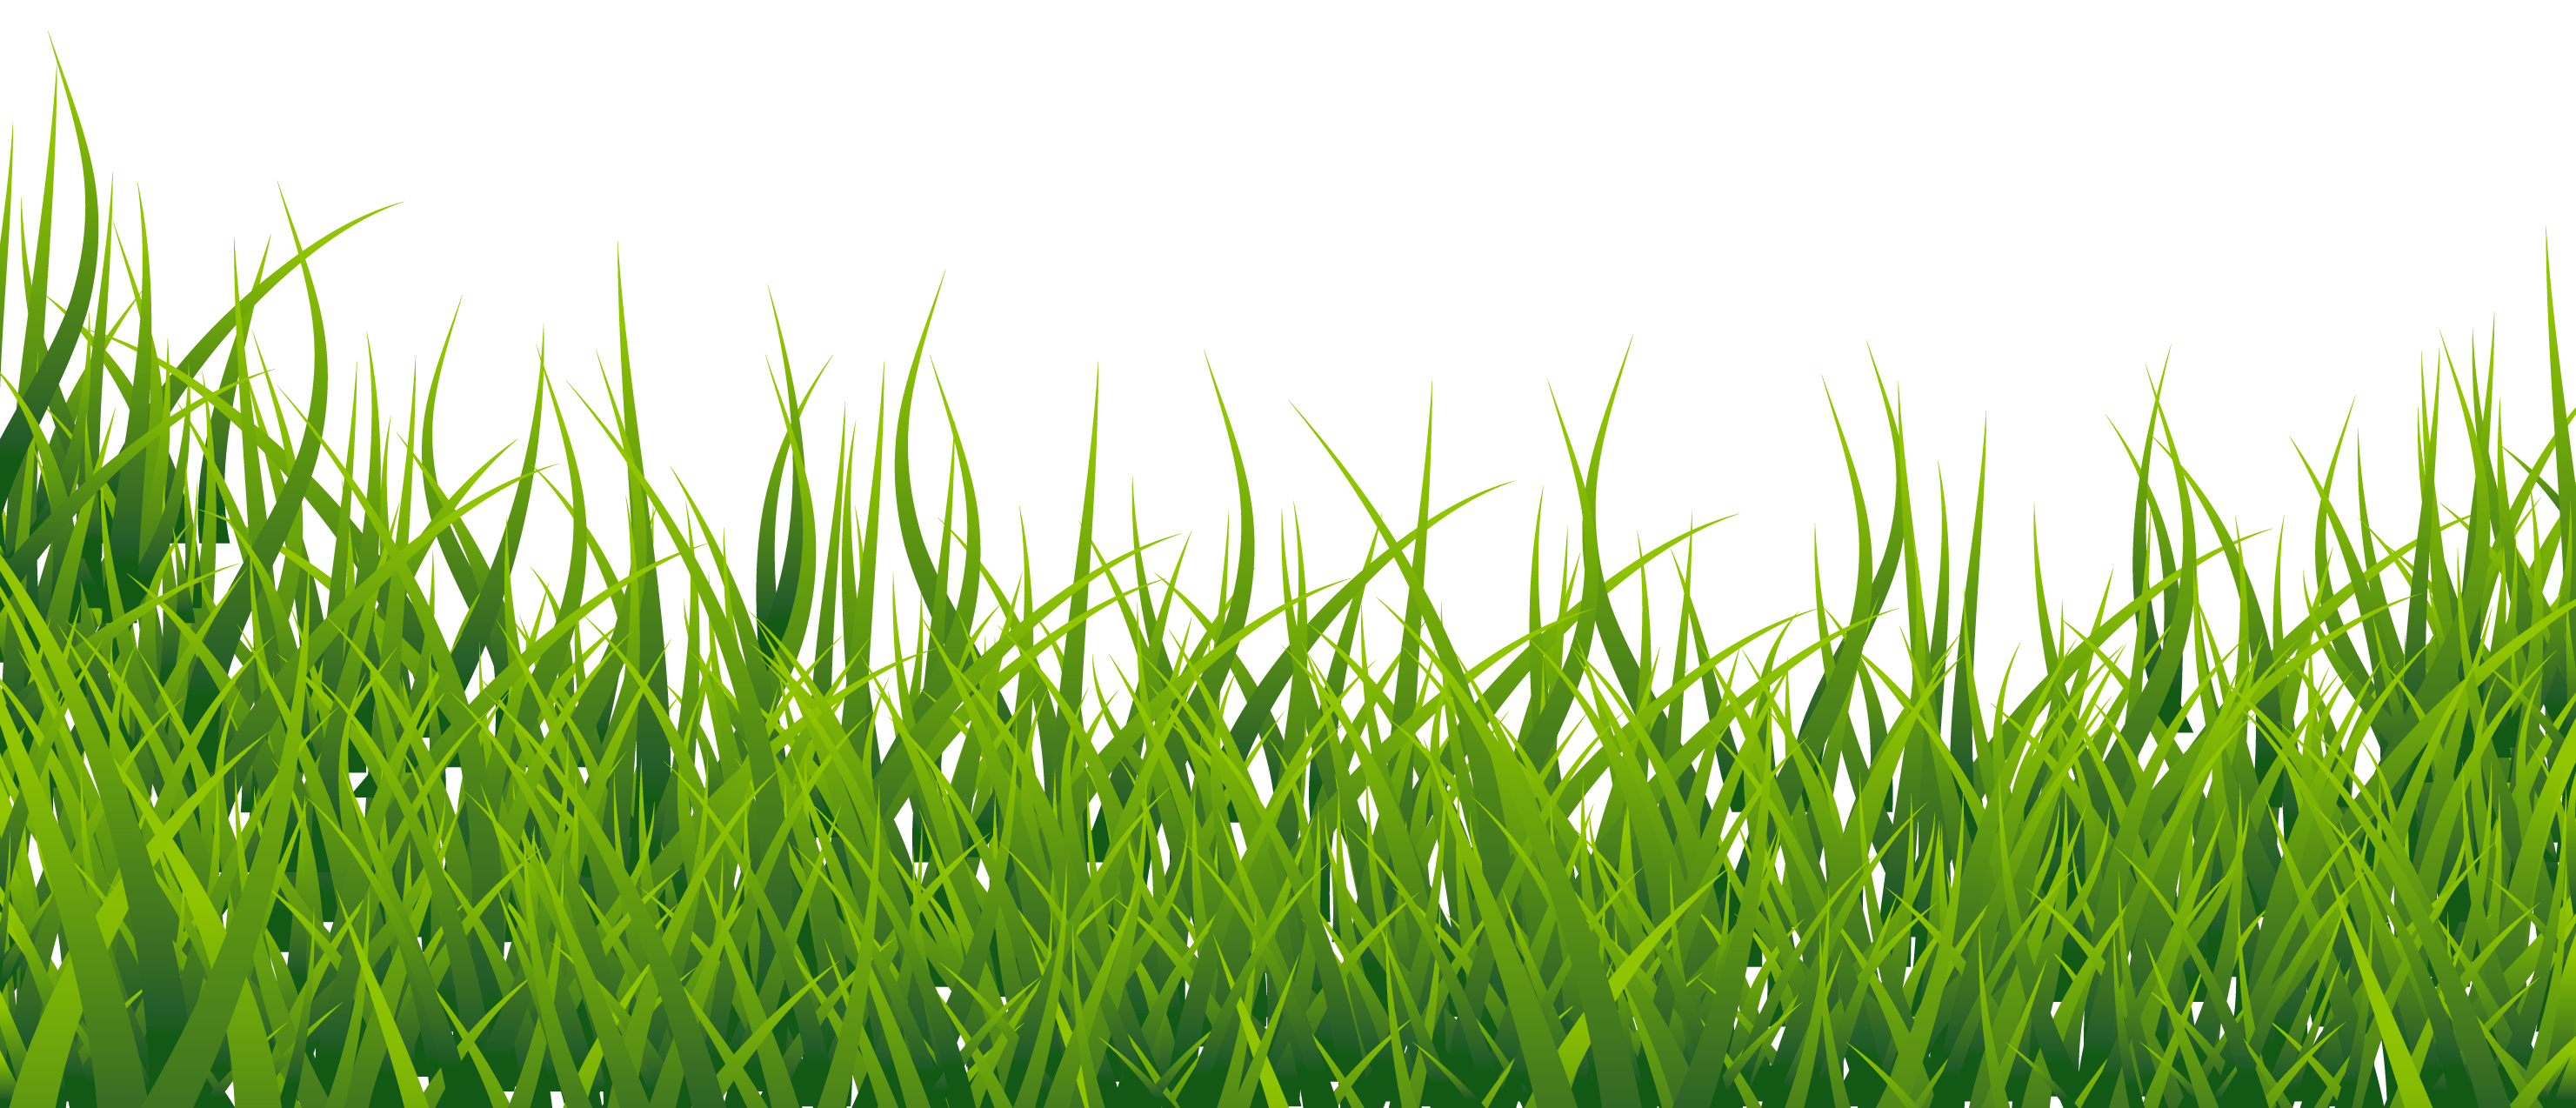 Summer Green Field Free Transparent Image HQ PNG Image